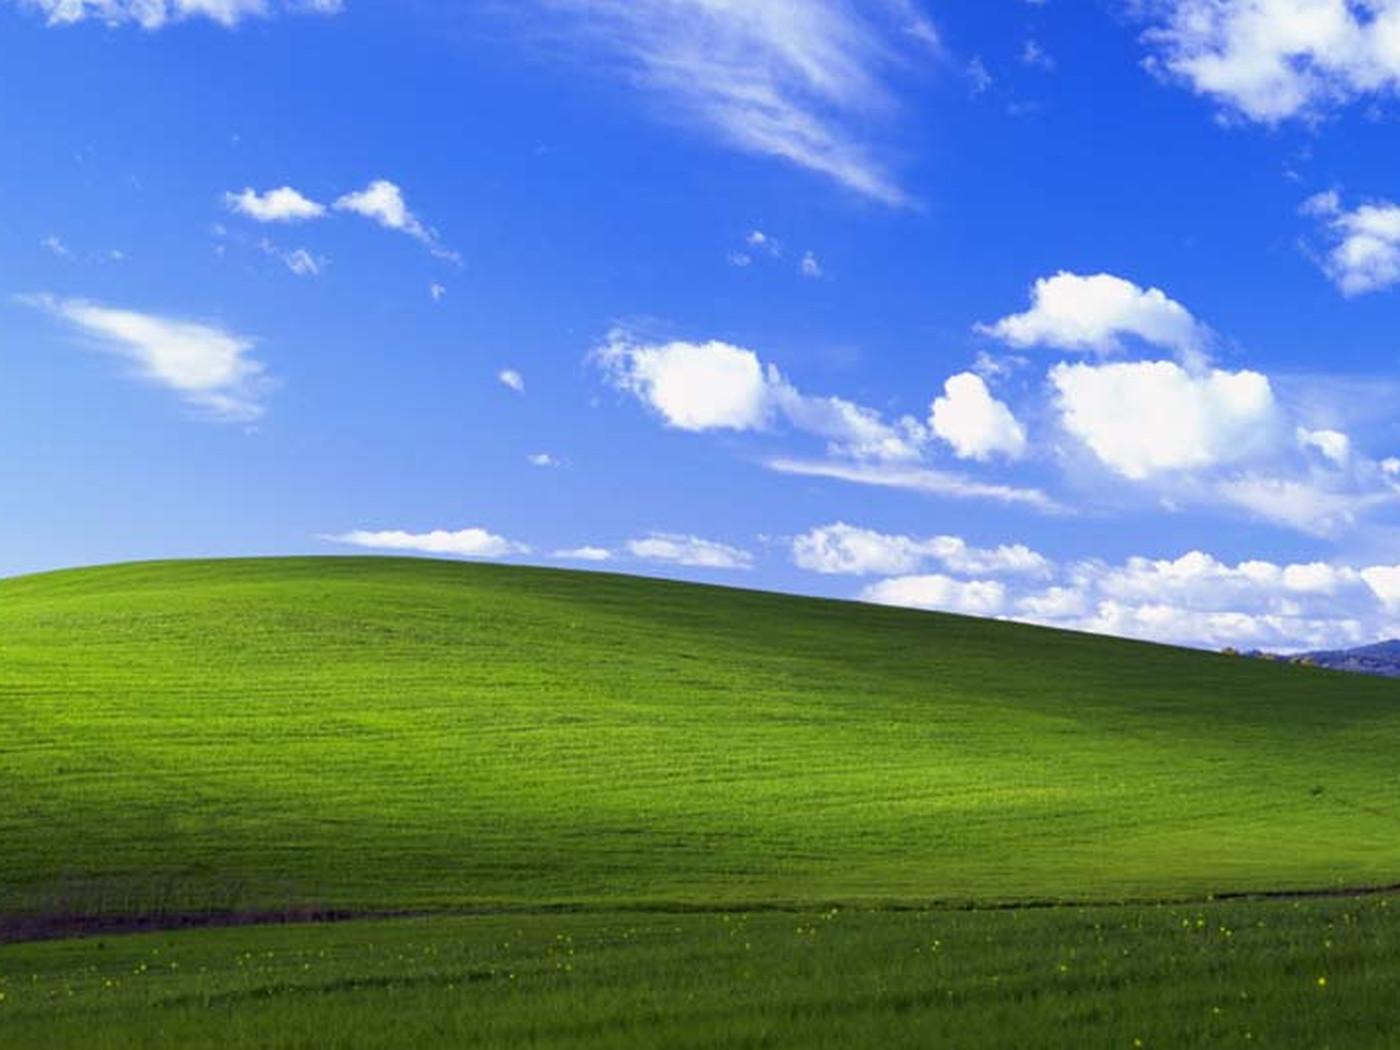 How the rolling hills of 'Bliss' changed desktop background